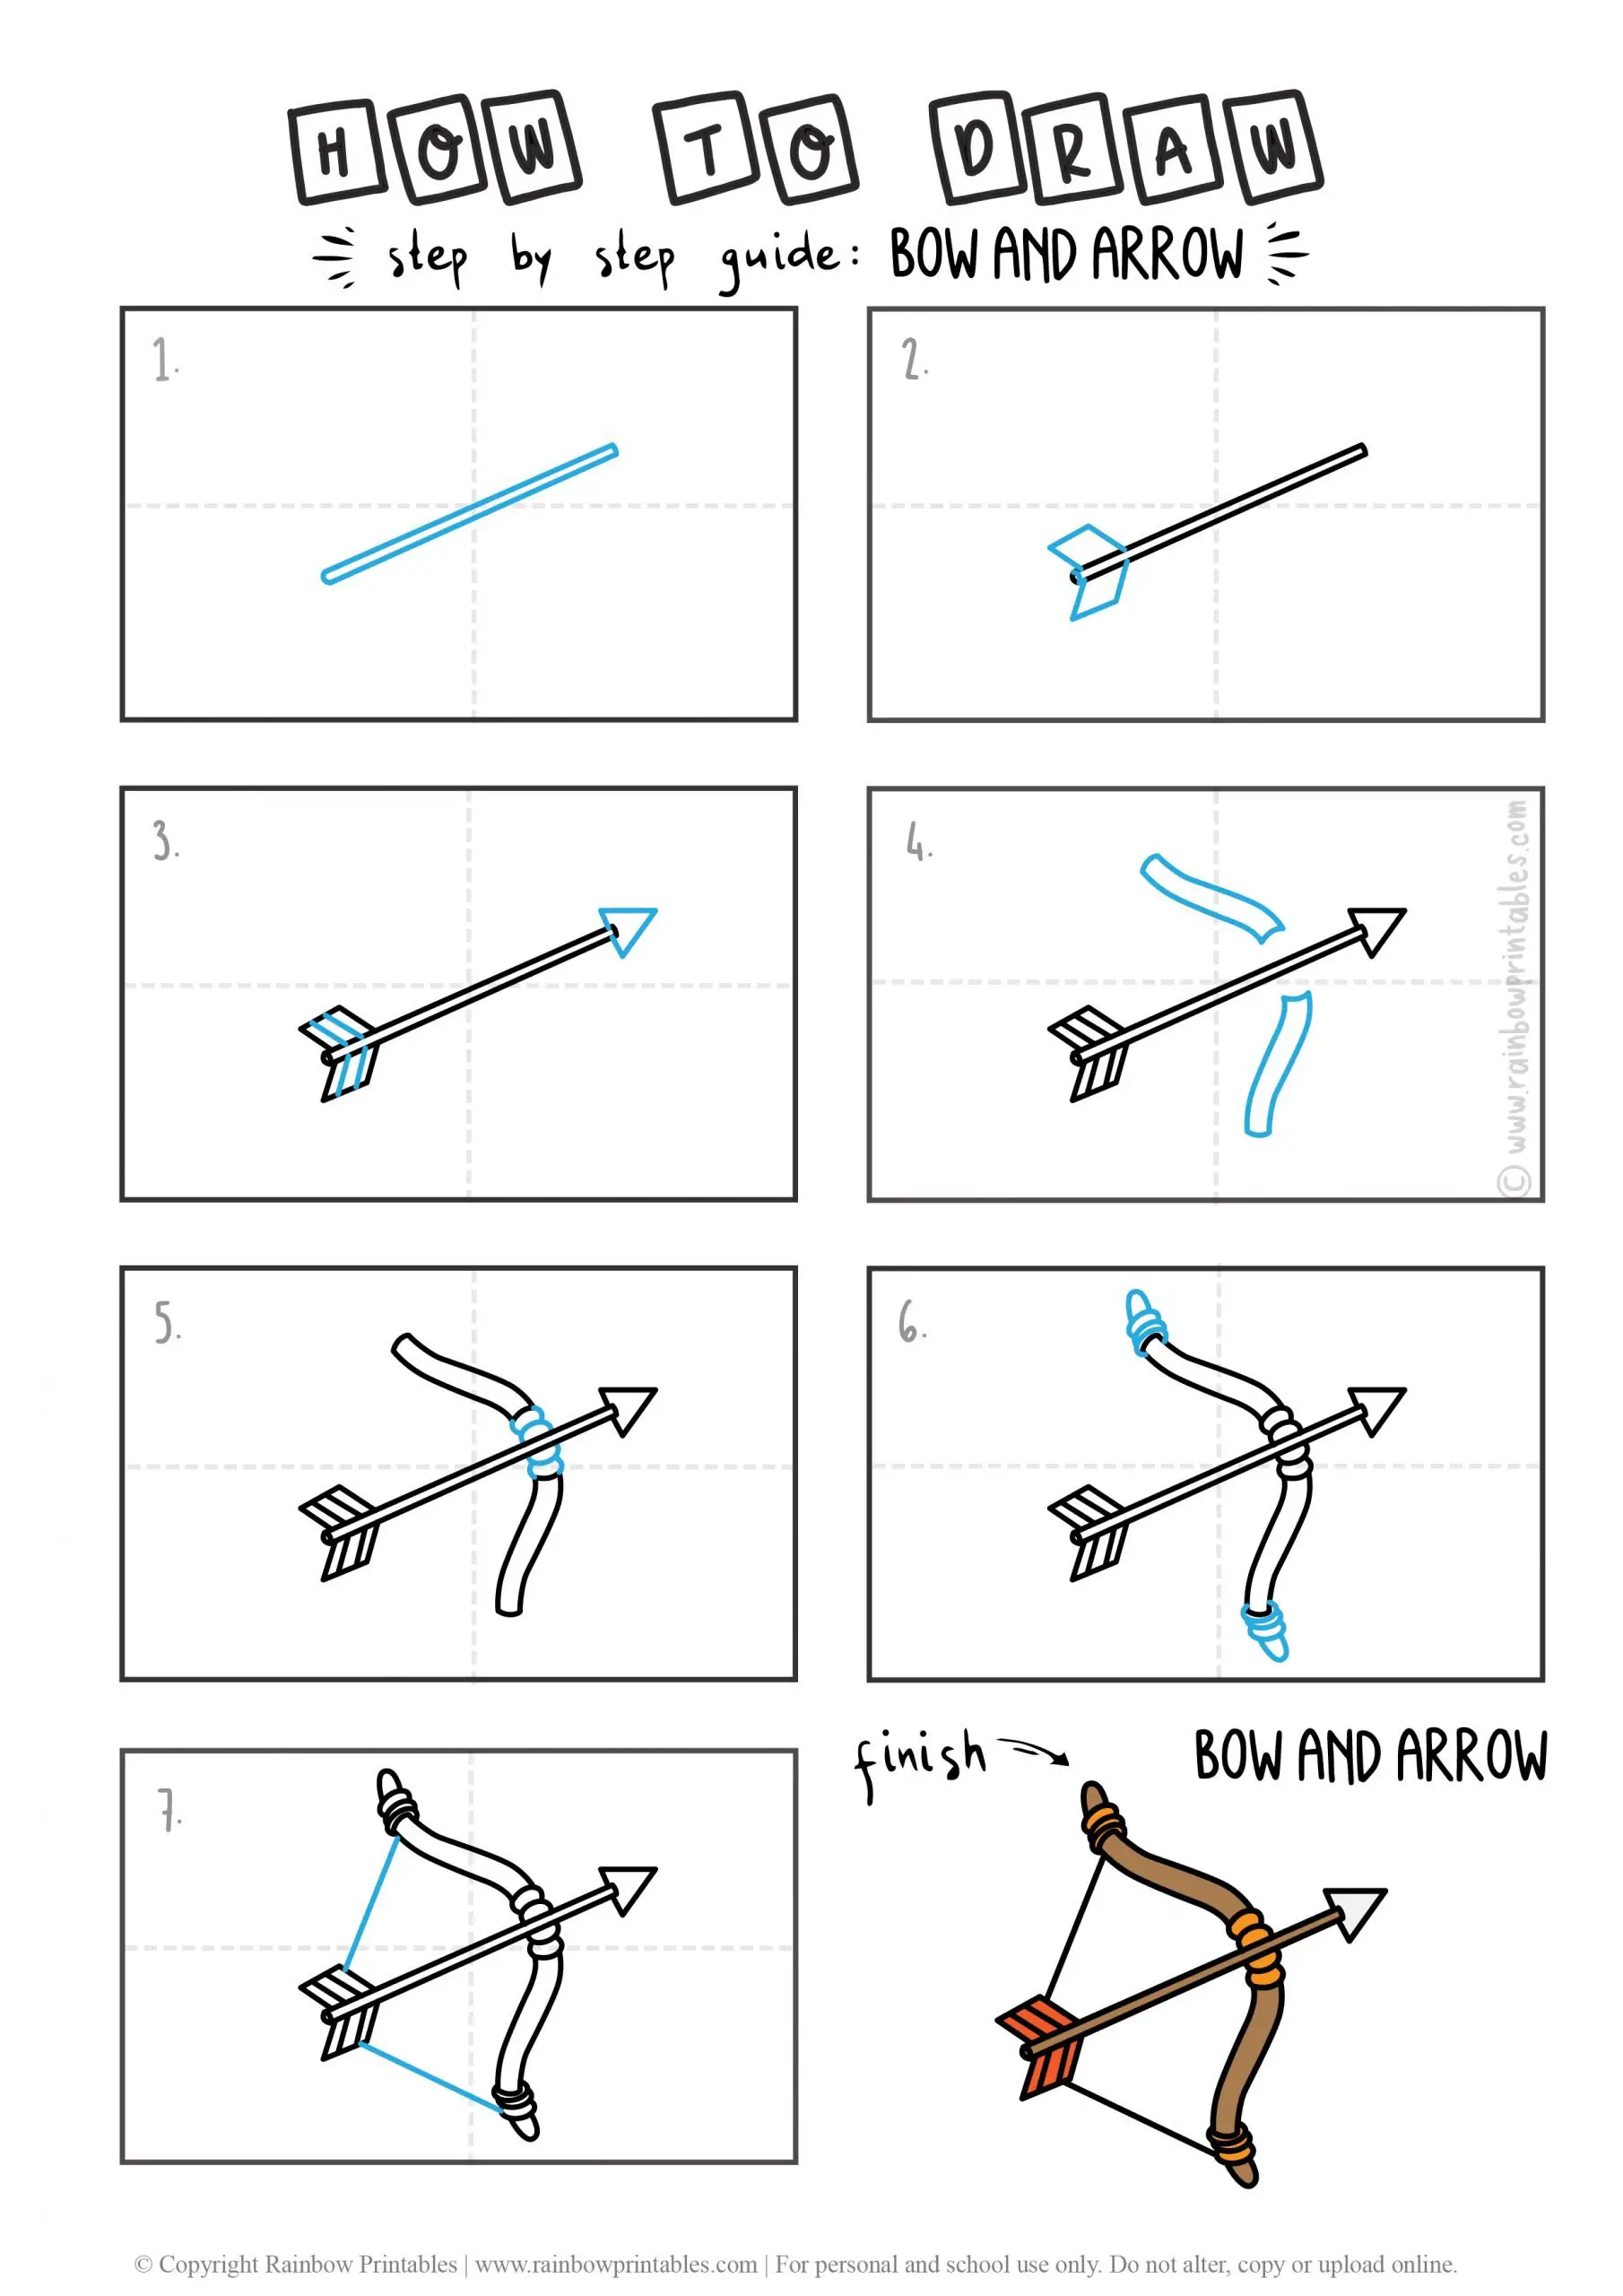 HOW TO DRAW A BOW AND ARROW WEAPON GUIDE ILLUSTRATION STEP BY STEP EASY SIMPLE FOR KIDS